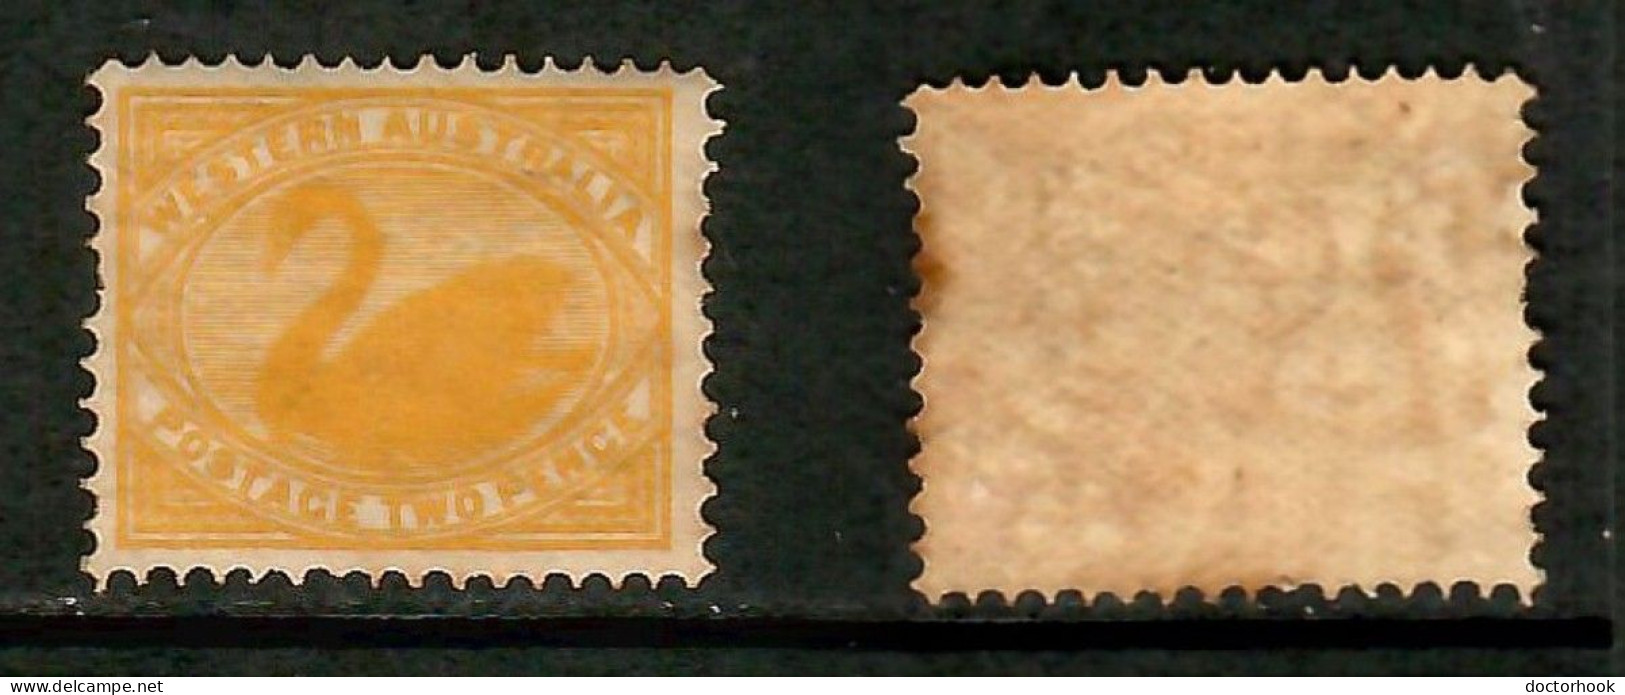 WESTERN AUSTRALIA   Scott # 77* MINT LH (1 Short Perf On Left Side) (CONDITION AS PER SCAN) (Stamp Scan # 1009-8) - Nuovi